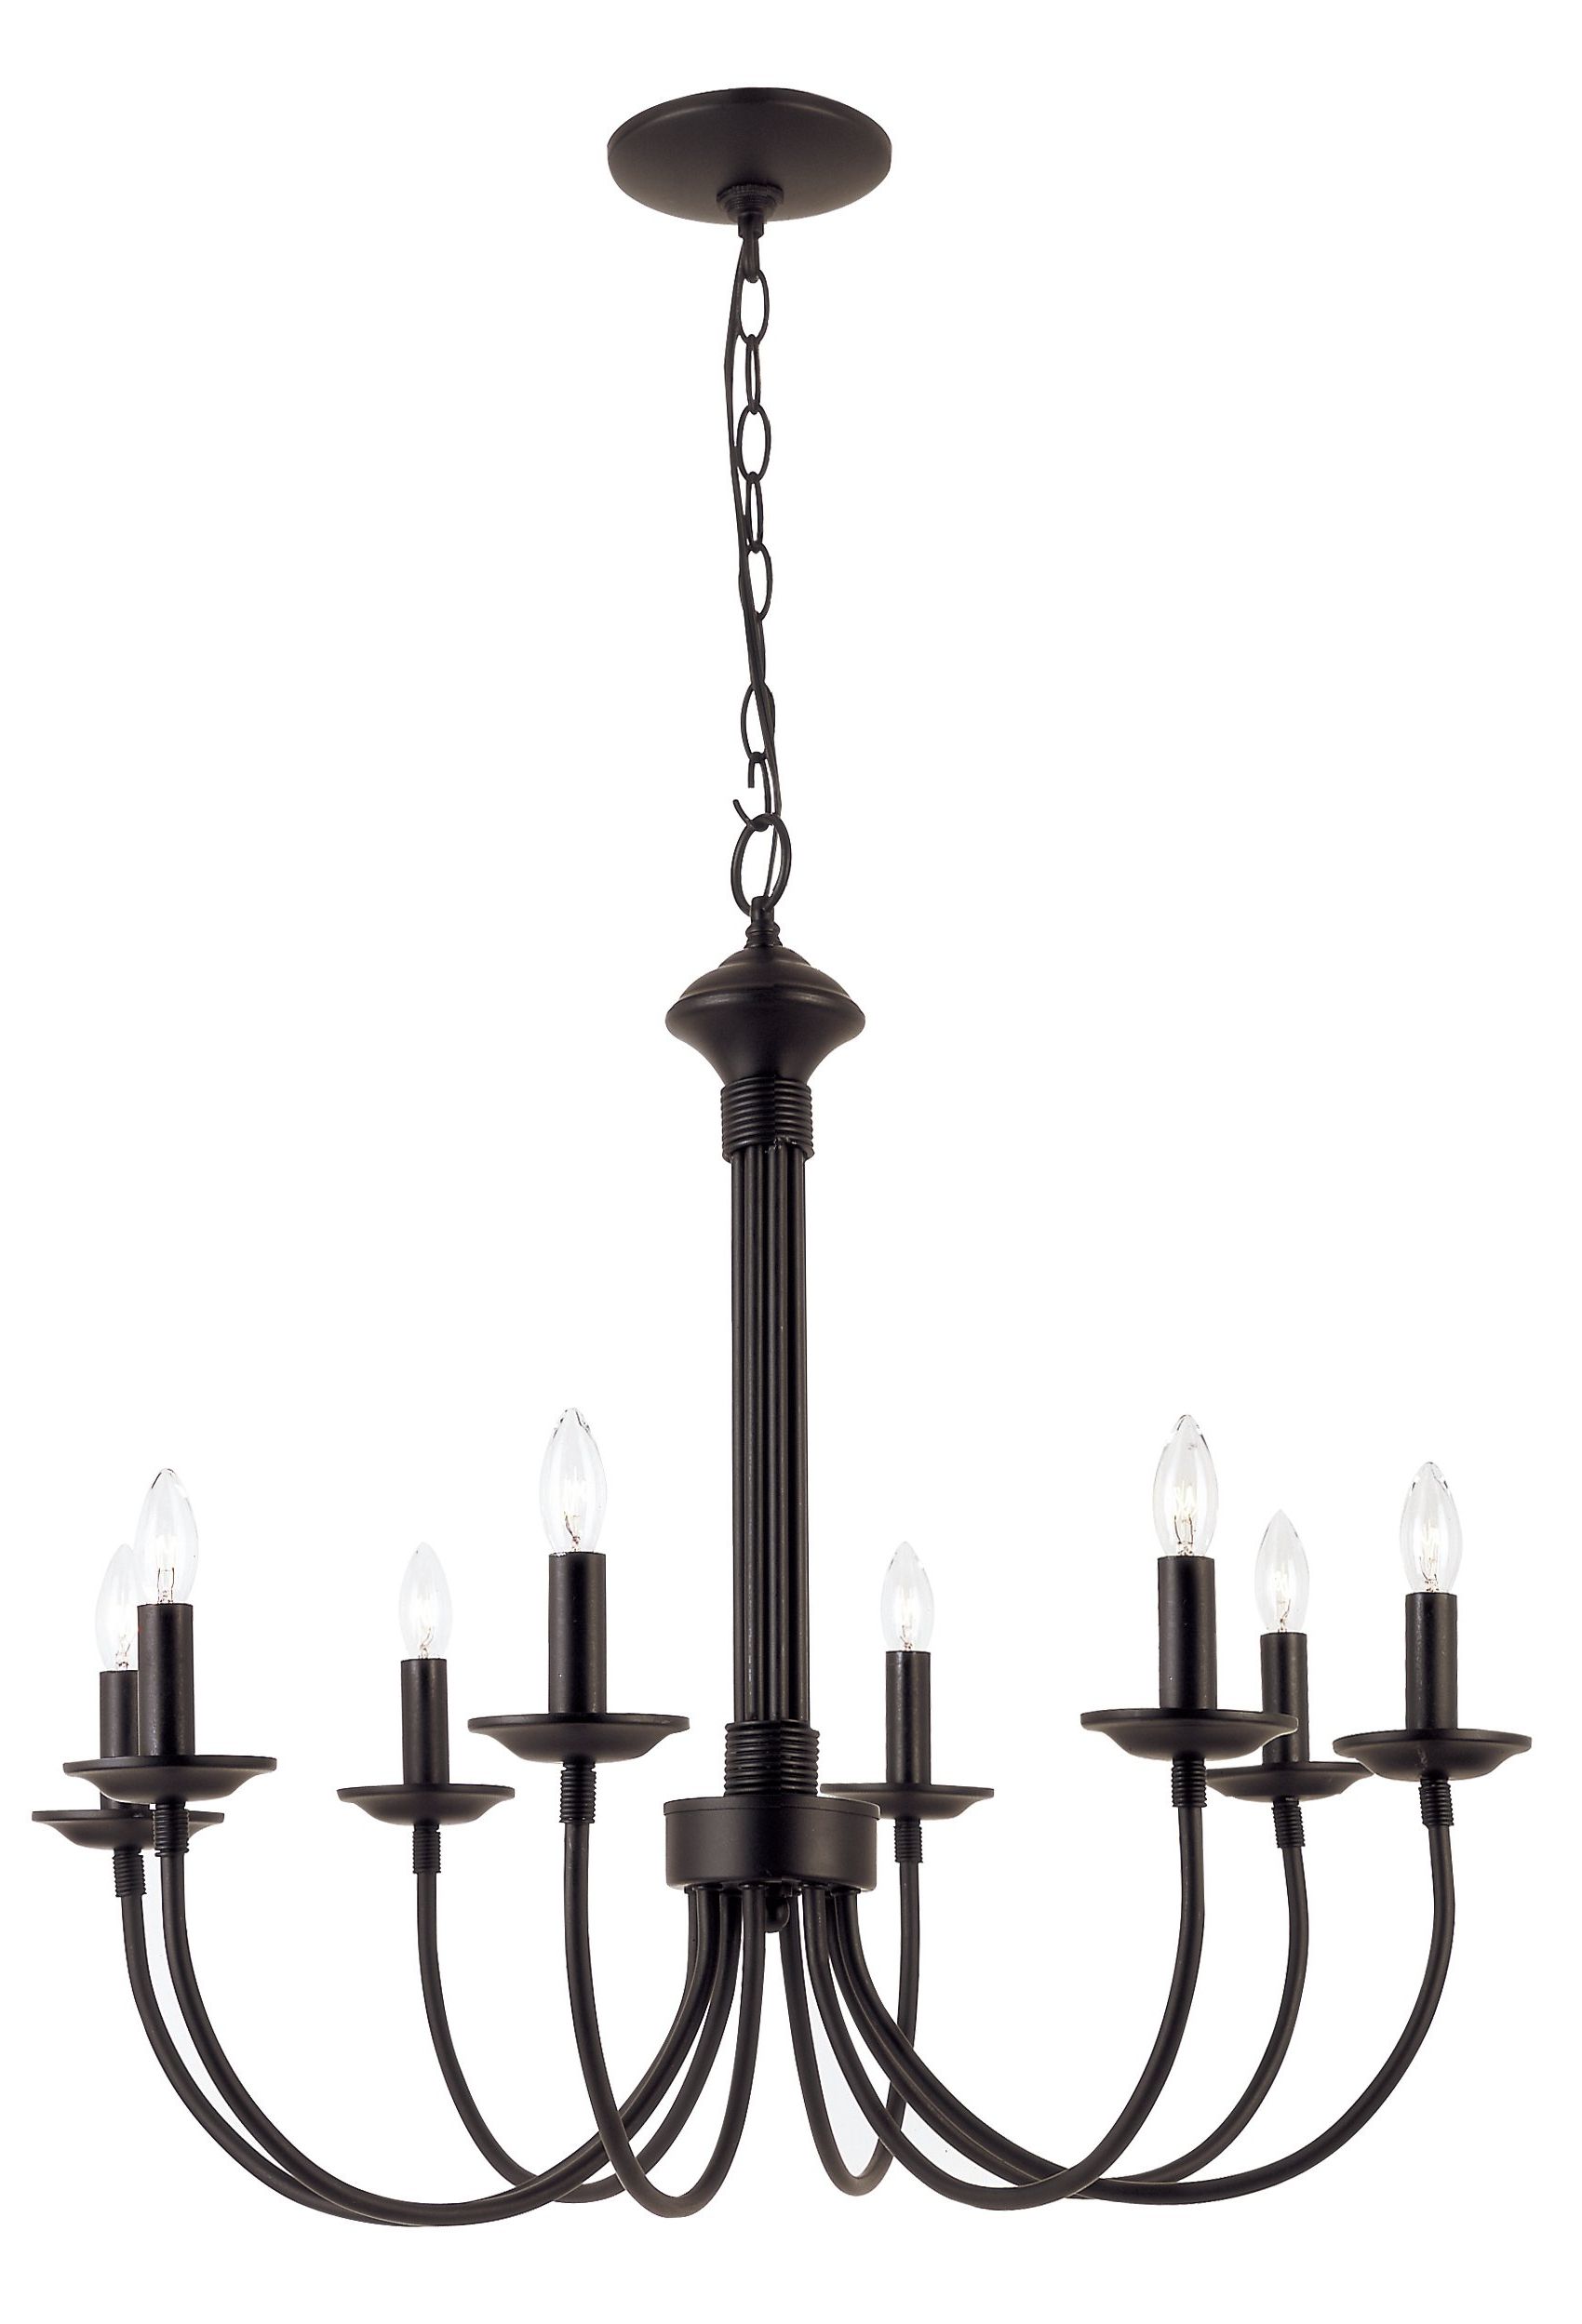 Recent Shaylee 8 Light Candle Style Chandelier With Regard To Shaylee 6 Light Candle Style Chandeliers (View 6 of 25)